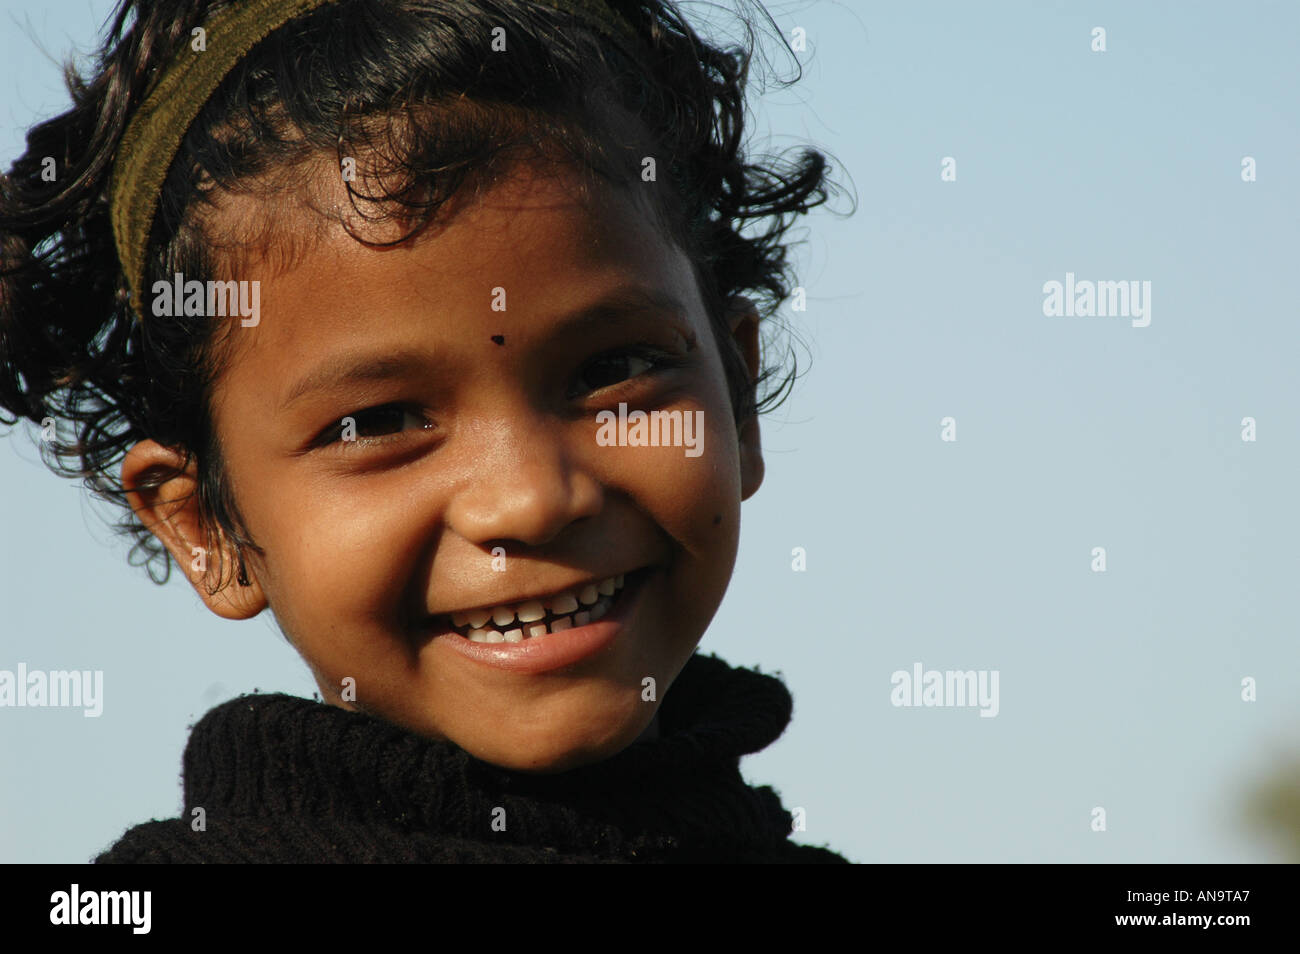 Portrait of smiling young north Indian Girl Stock Photo